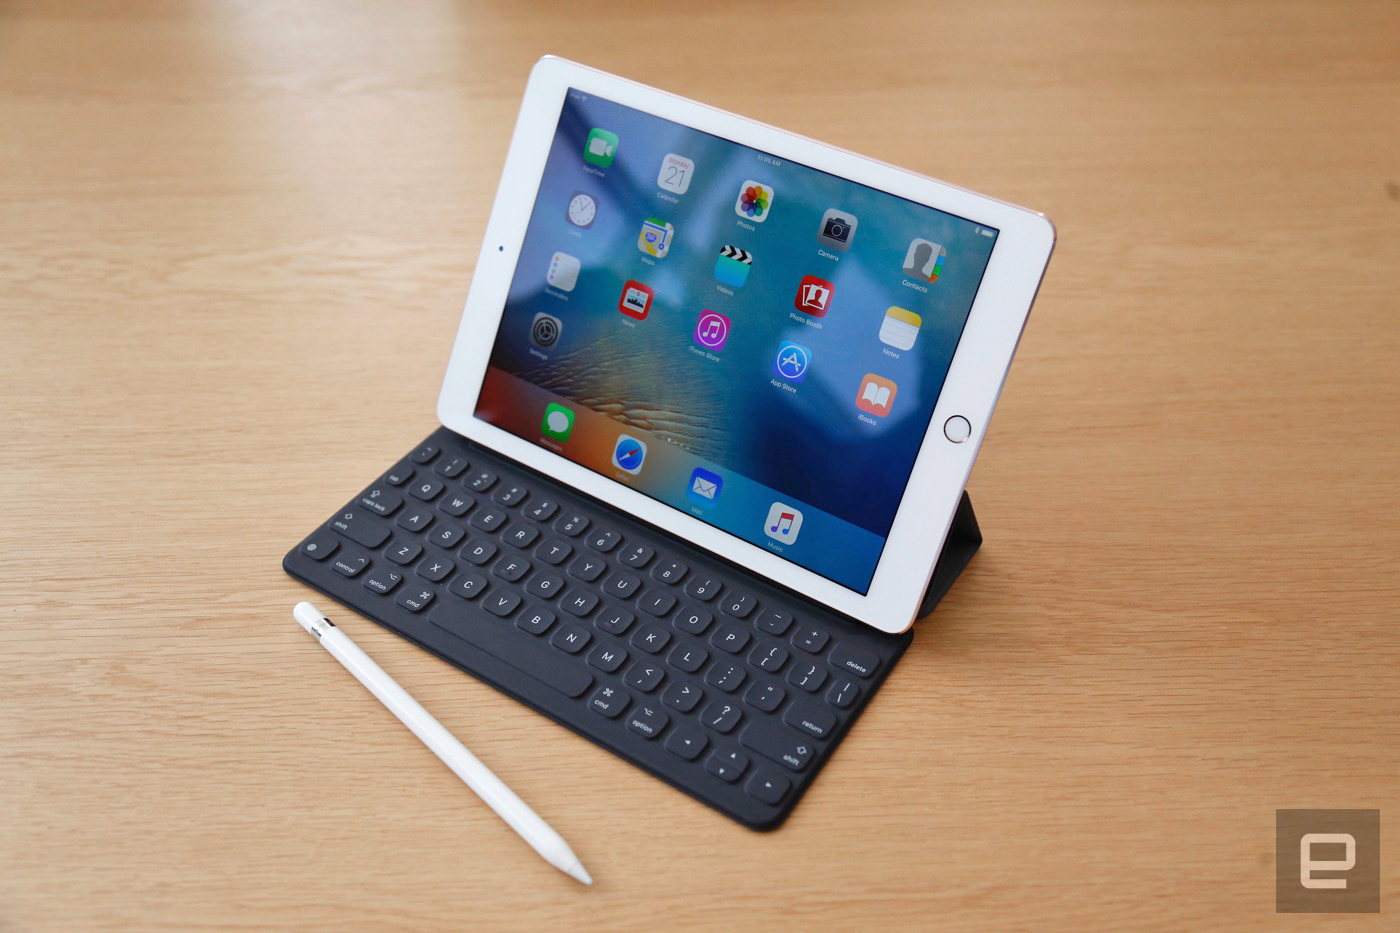 Apple's smaller iPad Pro is the 9.7-inch iPad we've always wanted